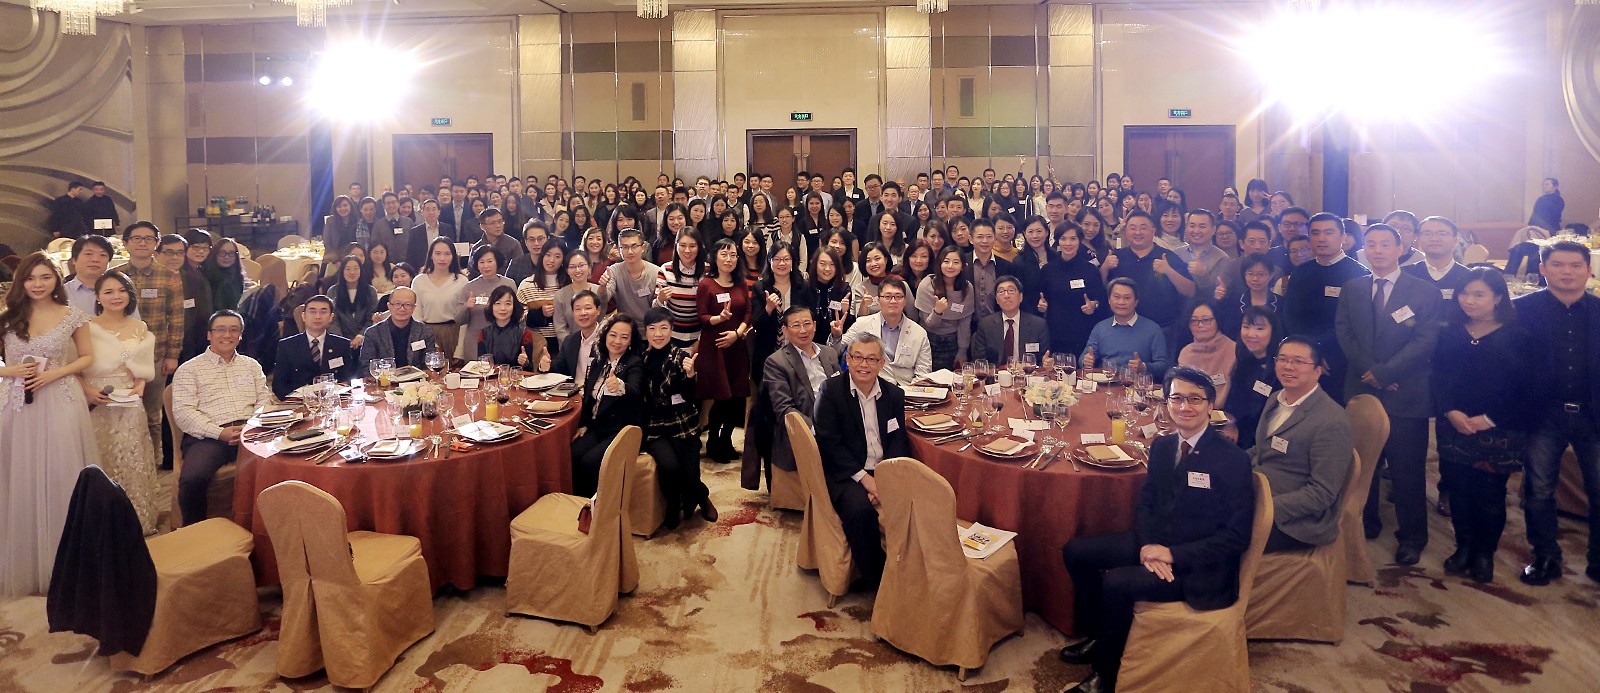 A record number of participants attend the alumni dinner in Shanghai.